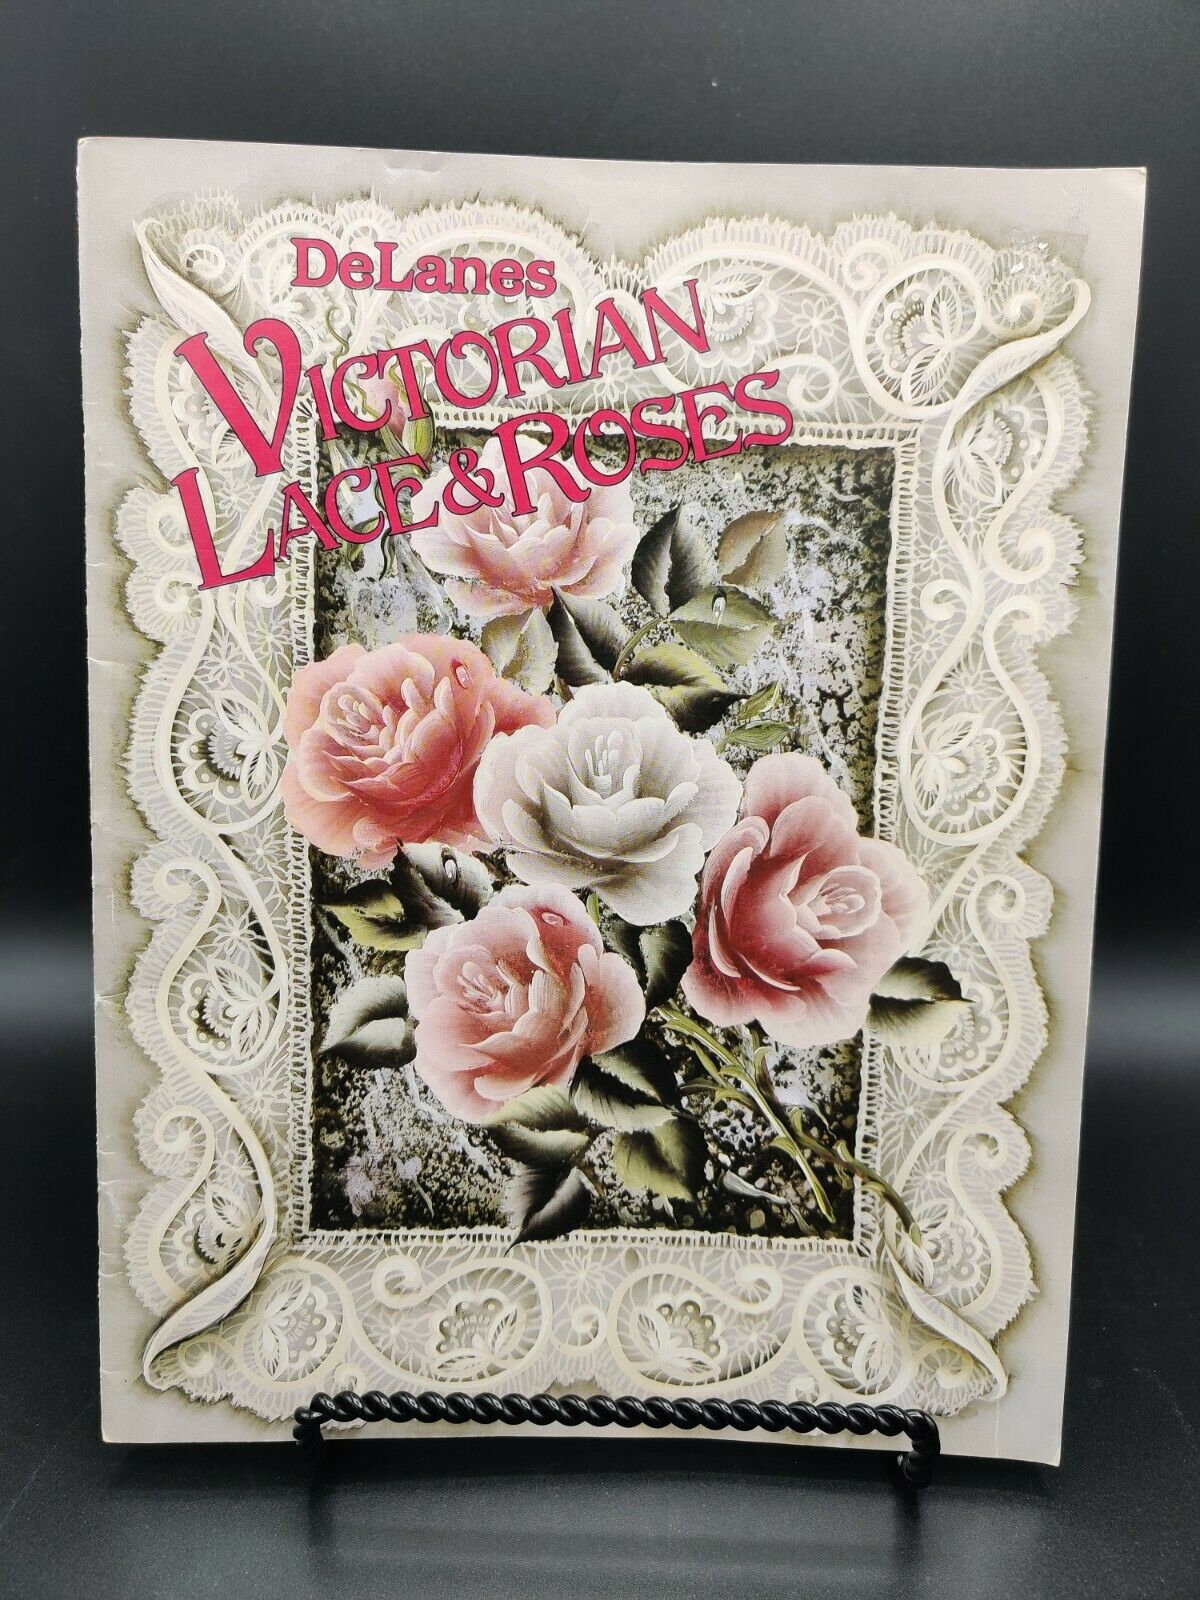 Tole Painting Delanes Victorian Lace And Roses Instruction Book 1989